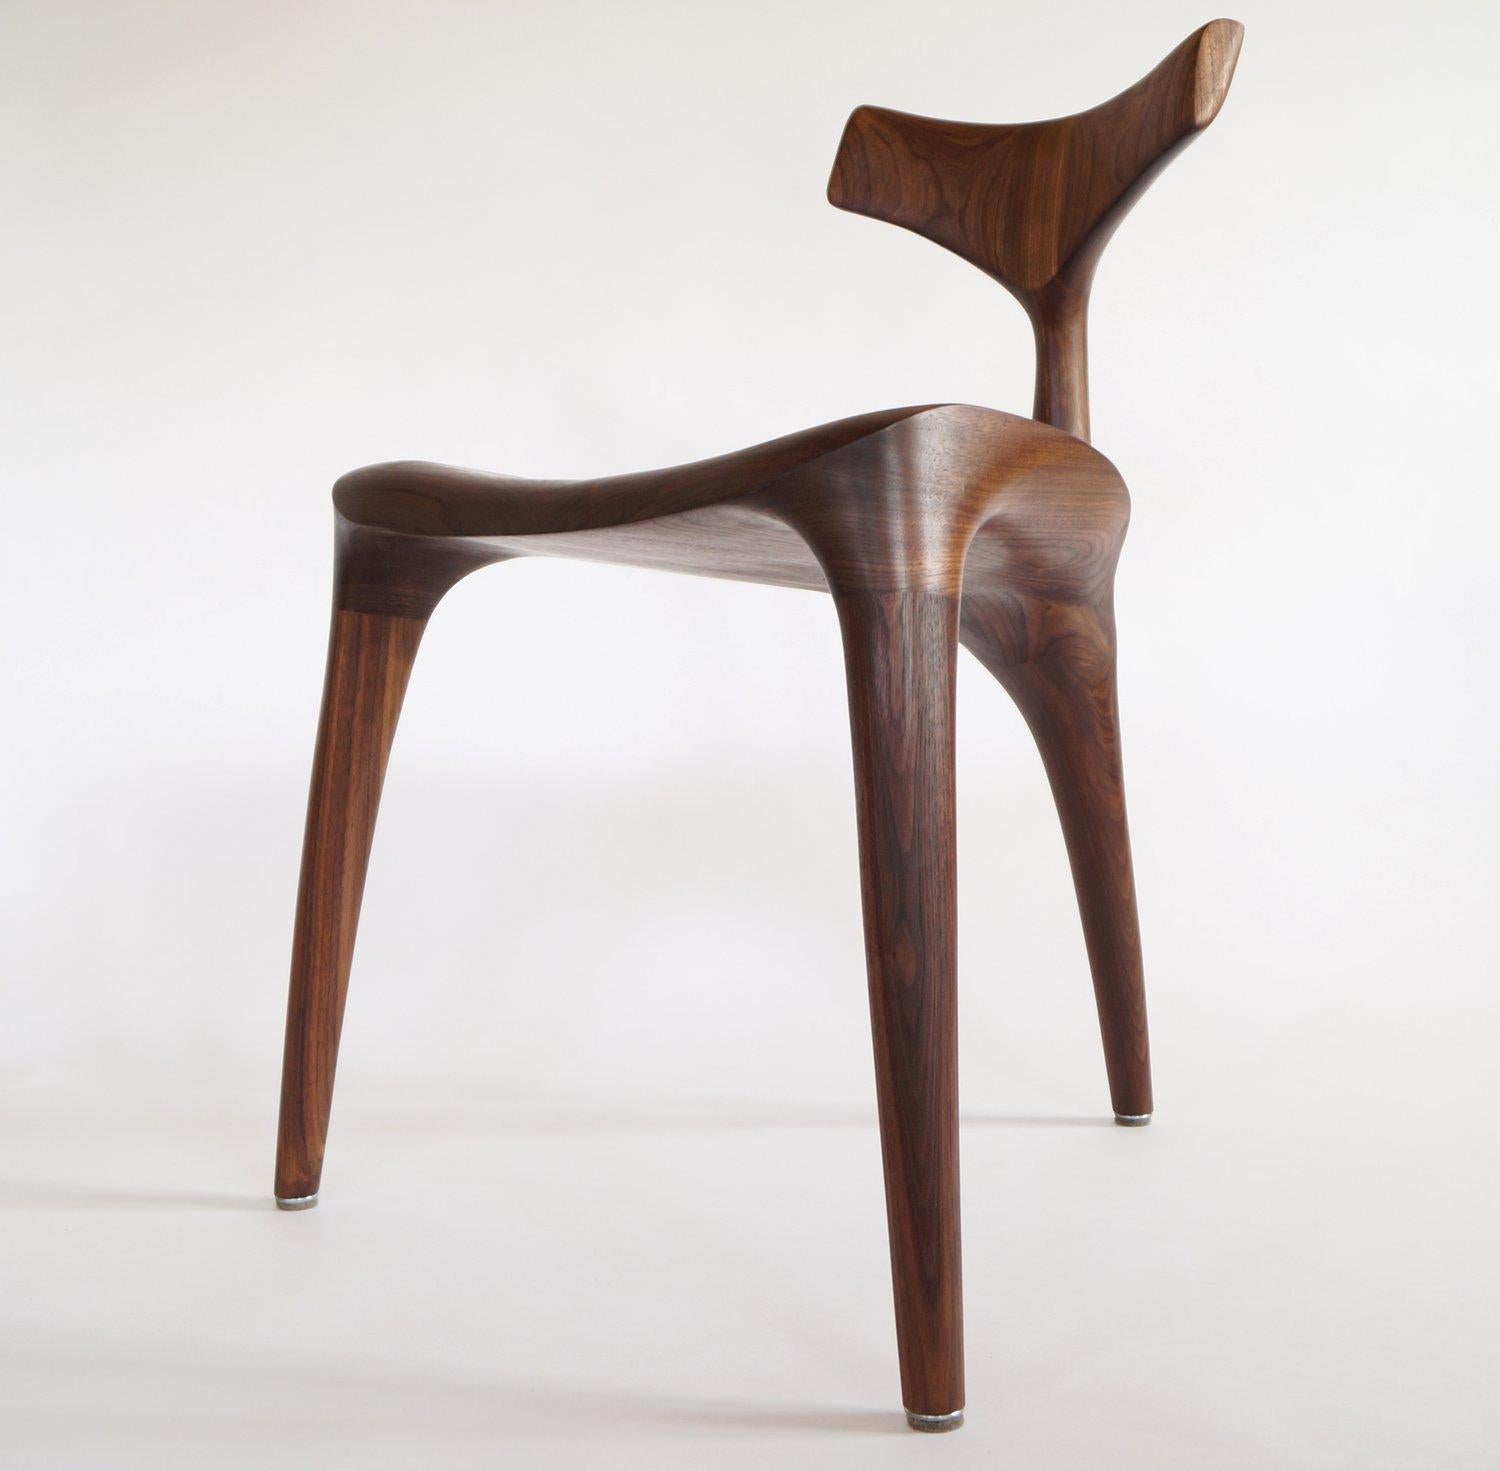 Danish Triplex MS22 Dining Room Chair Handcrafted and Designed by Morten Stenbaek